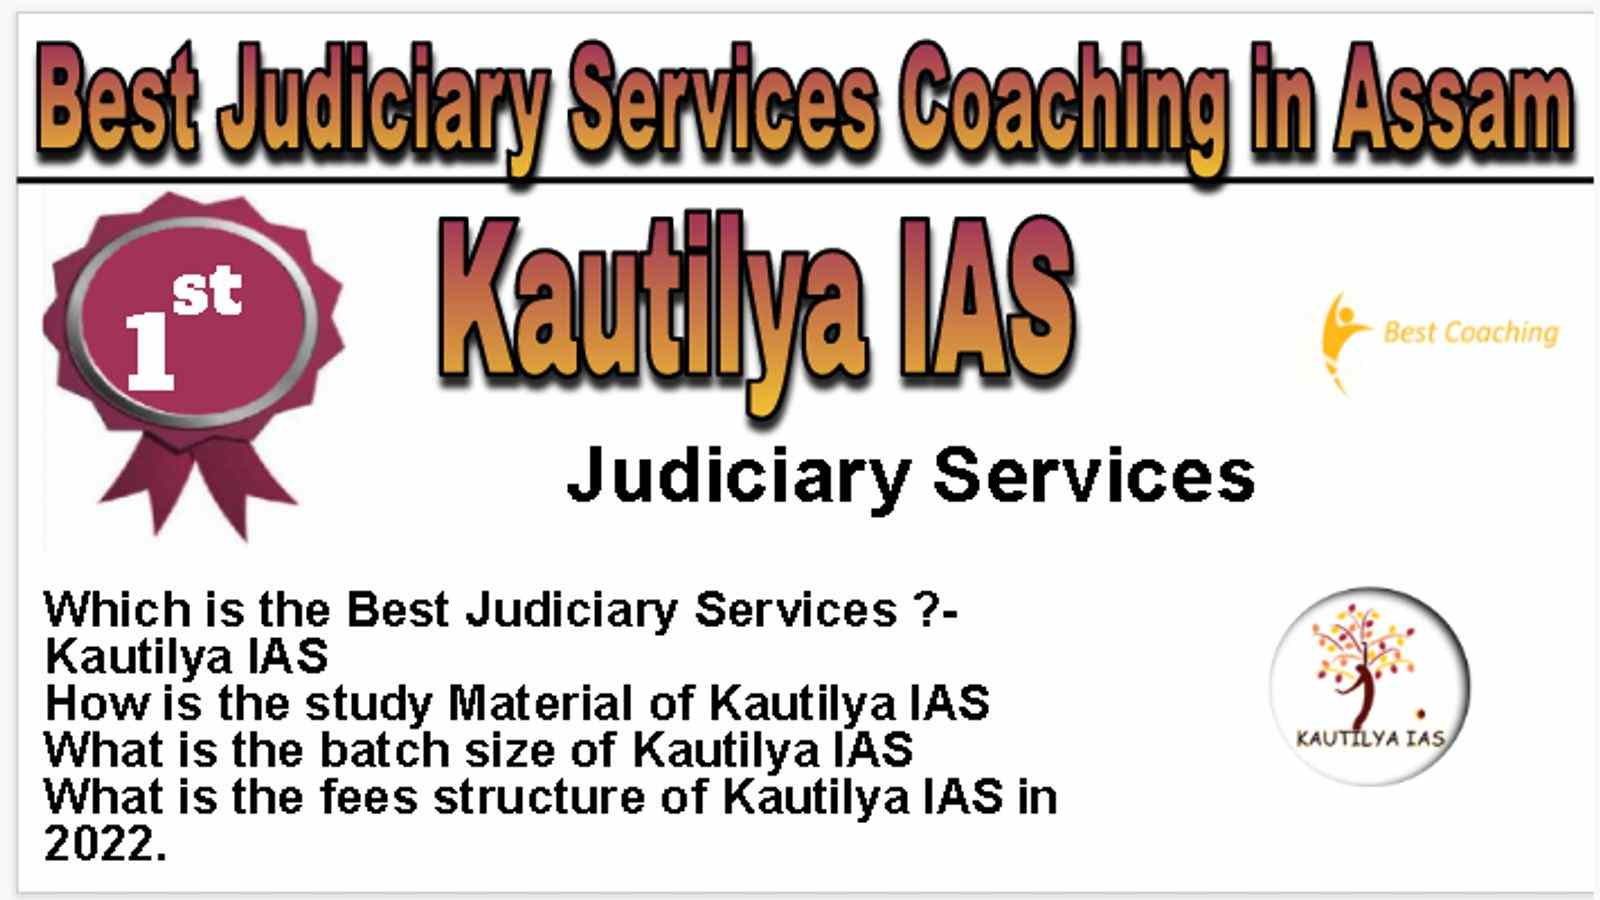 Rank 1 Best Judiciary Services Coaching in Assam